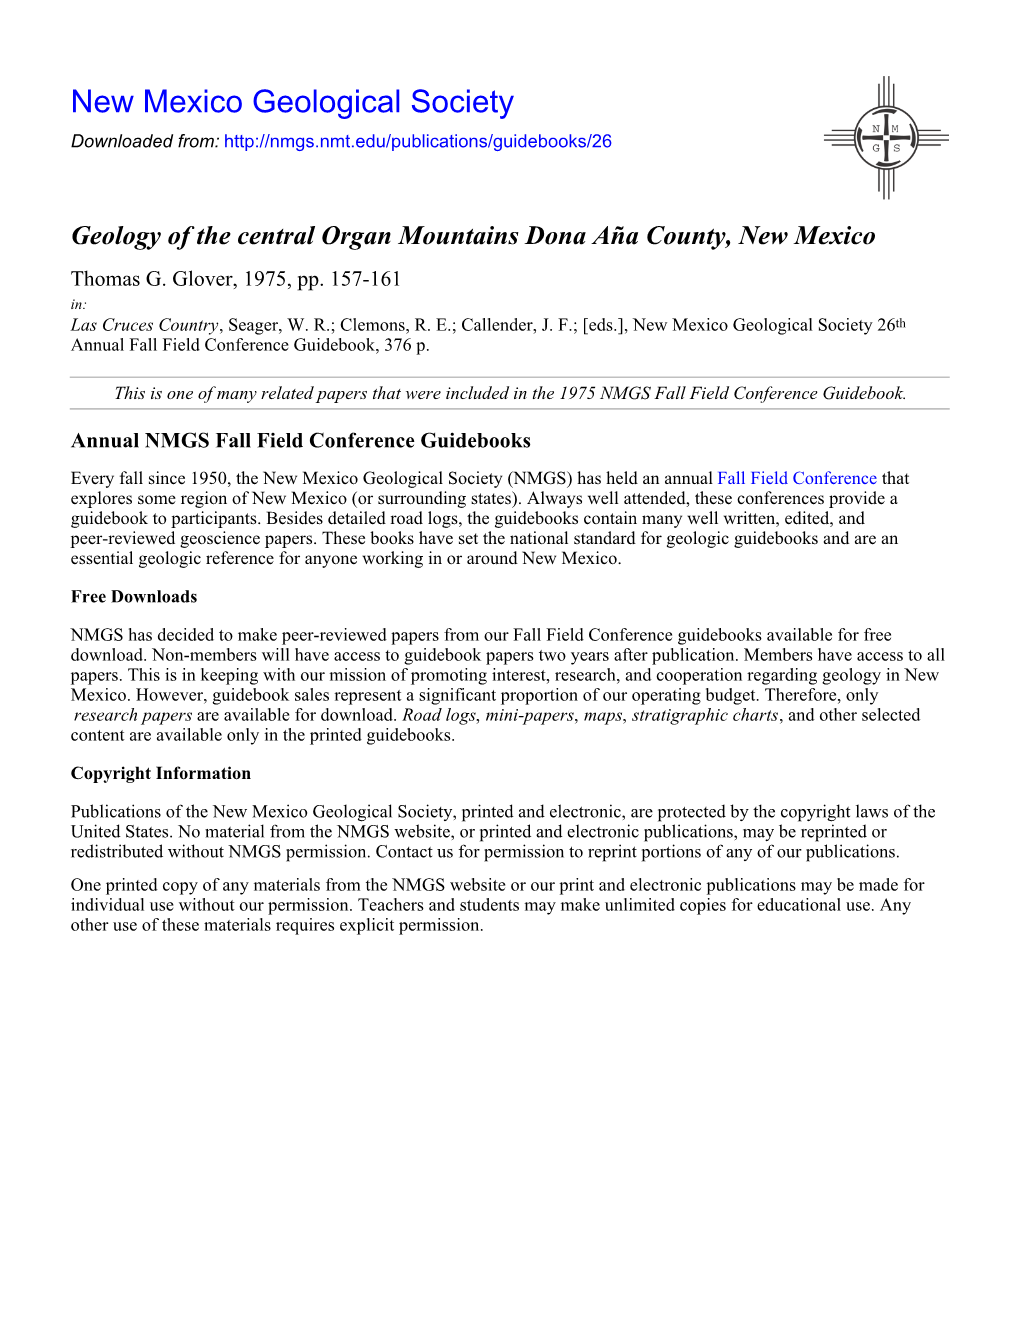 Geology of the Central Organ Mountains Dona Aña County, New Mexico Thomas G